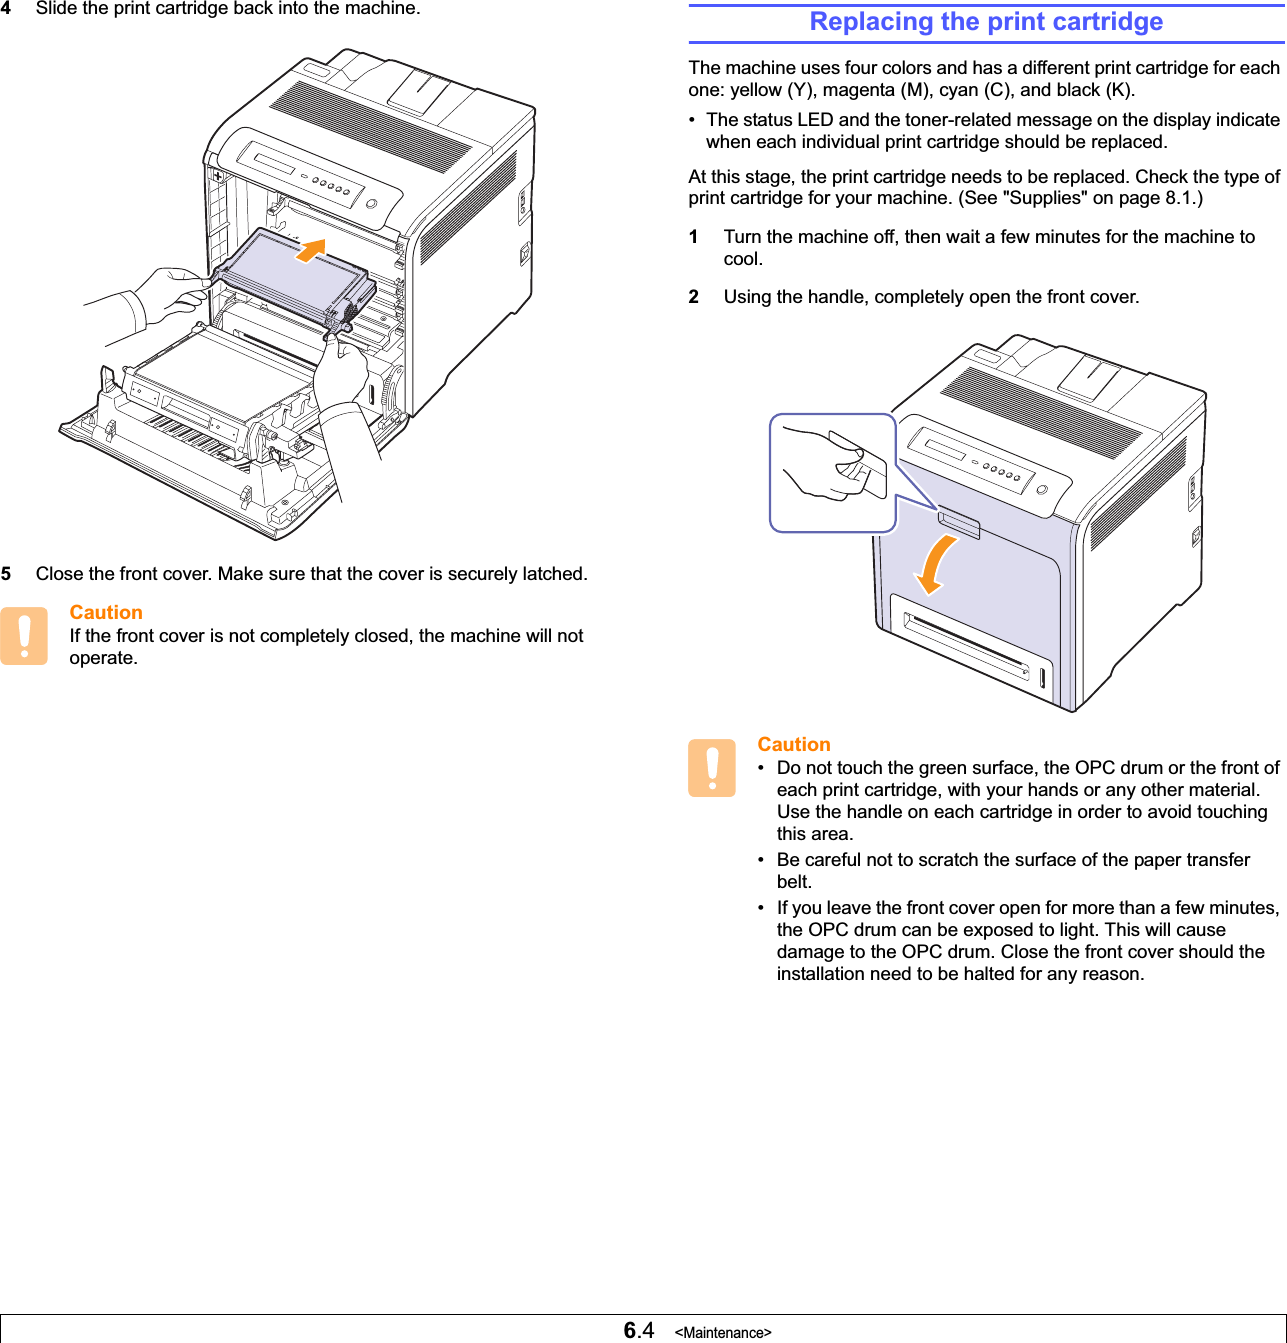 6.4   &lt;Maintenance&gt;4Slide the print cartridge back into the machine.5Close the front cover. Make sure that the cover is securely latched.CautionIf the front cover is not completely closed, the machine will not operate.Replacing the print cartridgeThe machine uses four colors and has a different print cartridge for each one: yellow (Y), magenta (M), cyan (C), and black (K).• The status LED and the toner-related message on the display indicate when each individual print cartridge should be replaced.At this stage, the print cartridge needs to be replaced. Check the type of print cartridge for your machine. (See &quot;Supplies&quot; on page 8.1.)1Turn the machine off, then wait a few minutes for the machine to cool.2Using the handle, completely open the front cover.Caution• Do not touch the green surface, the OPC drum or the front of each print cartridge, with your hands or any other material. Use the handle on each cartridge in order to avoid touching this area.• Be careful not to scratch the surface of the paper transfer belt.• If you leave the front cover open for more than a few minutes, the OPC drum can be exposed to light. This will cause damage to the OPC drum. Close the front cover should the installation need to be halted for any reason.